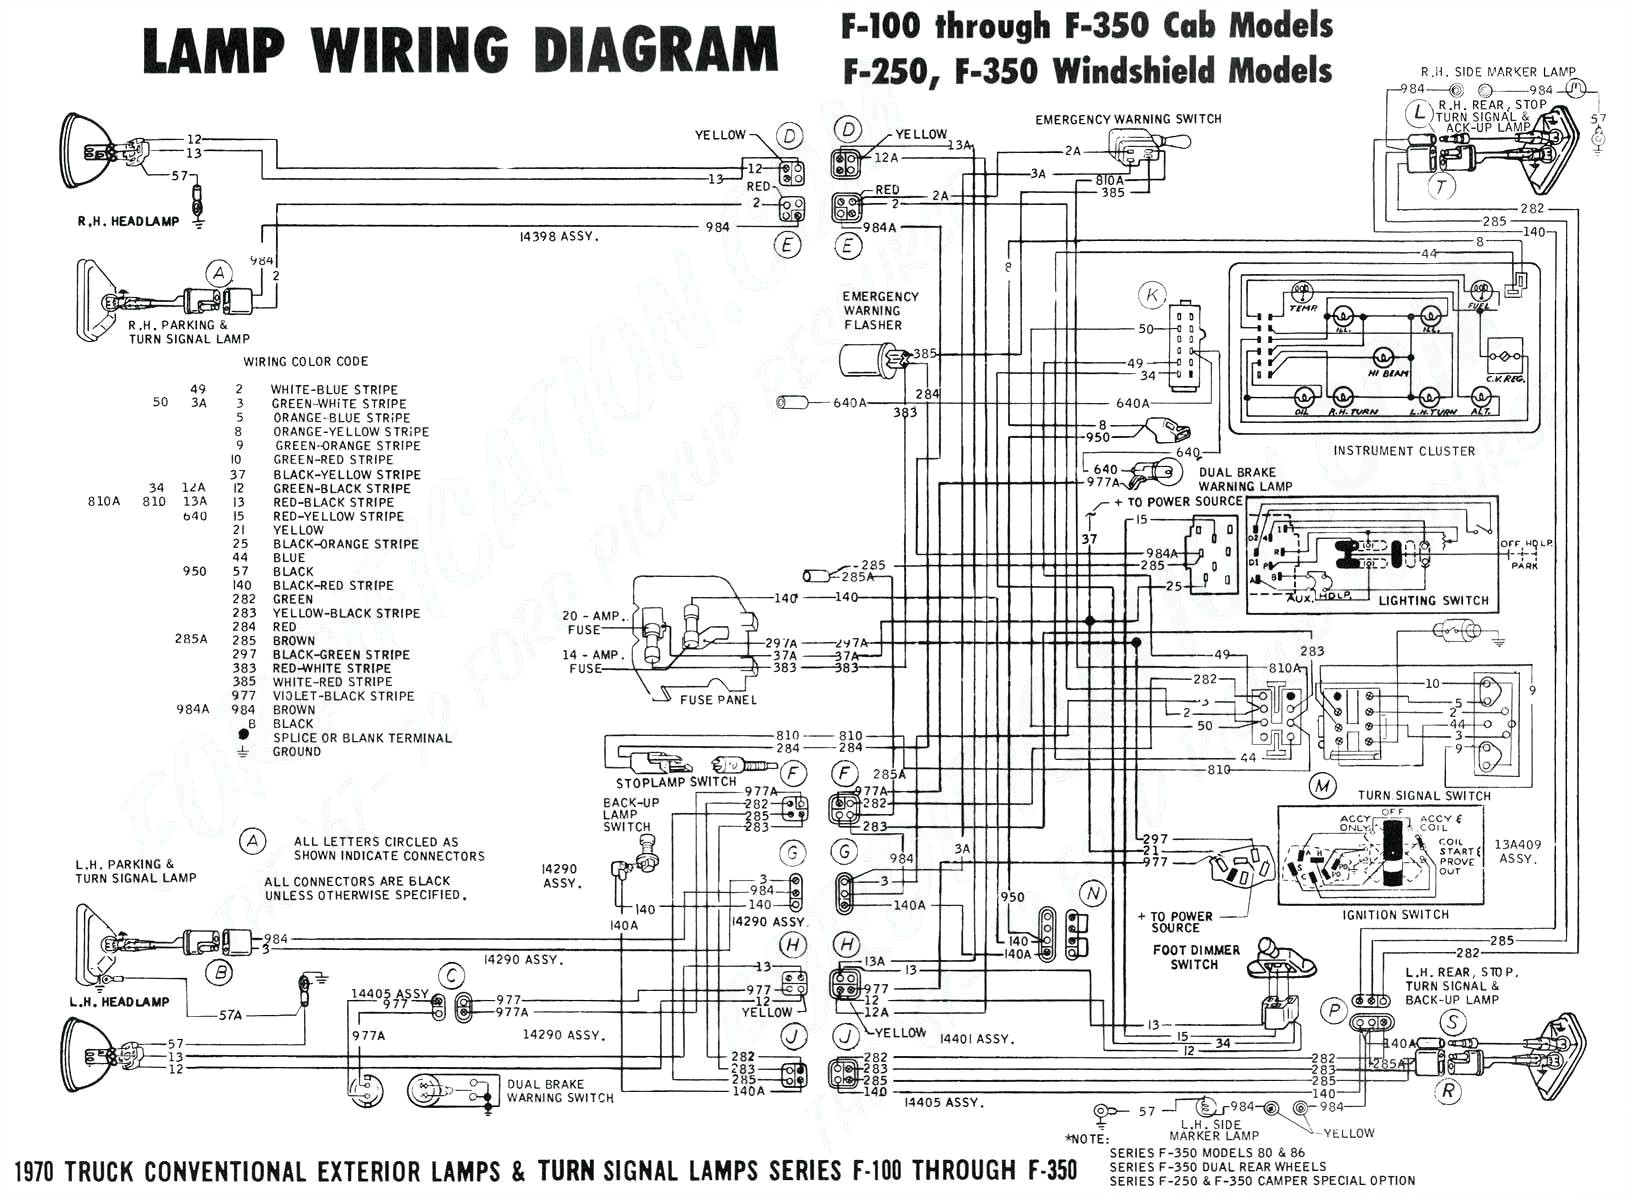 1986 cutlass fuse box wiring diagram article review electrical diagramming quottoolsquot page 2 vaf forums